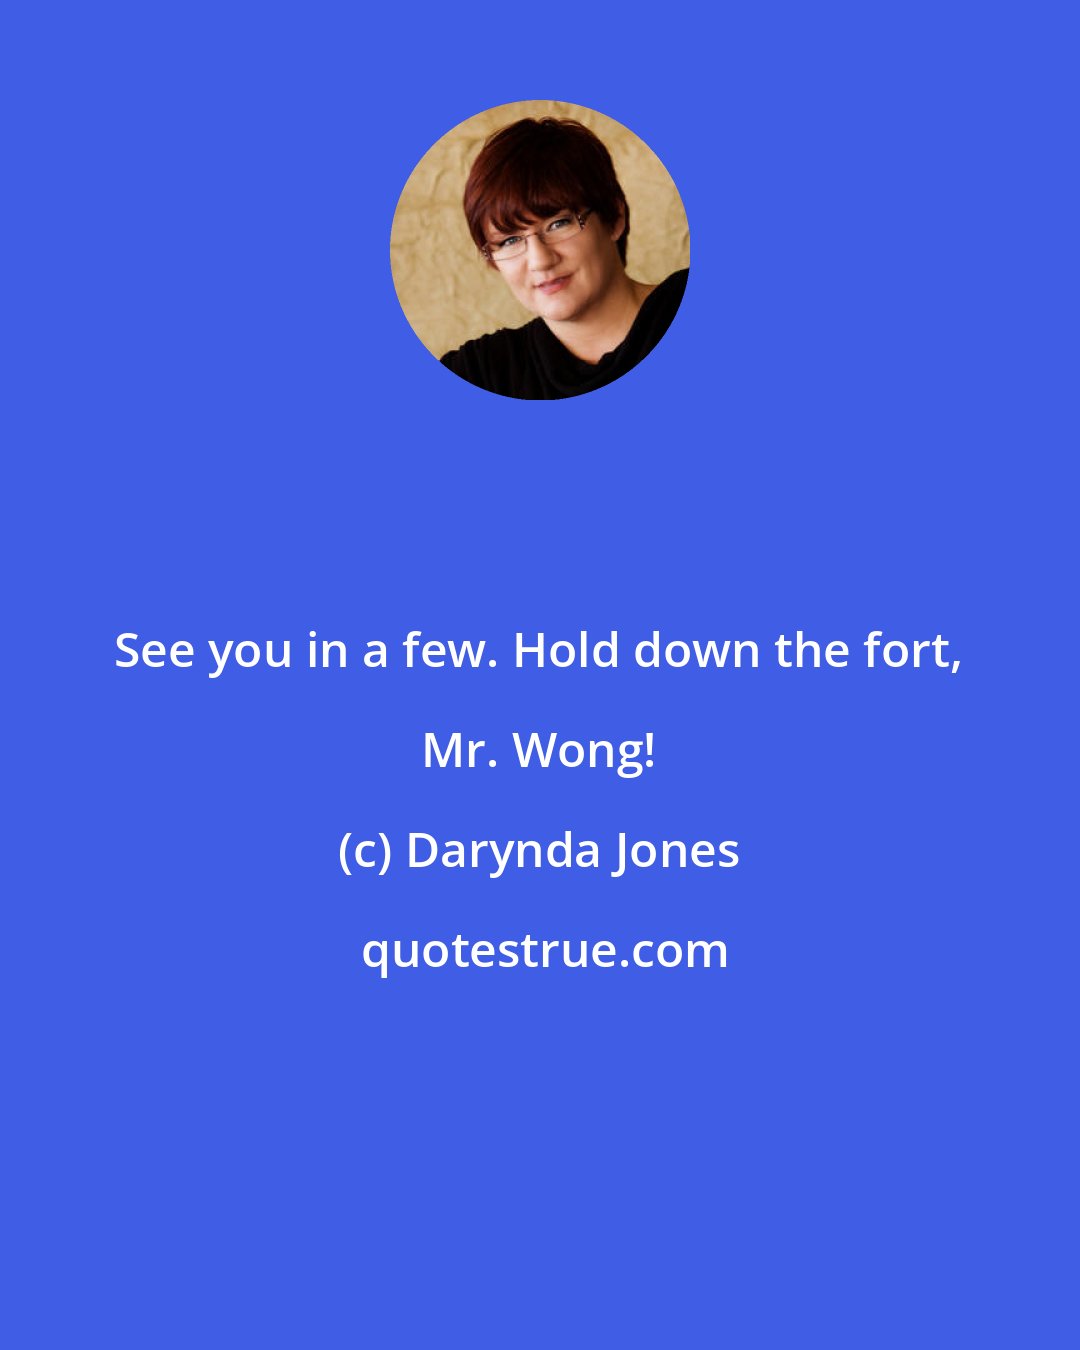 Darynda Jones: See you in a few. Hold down the fort, Mr. Wong!